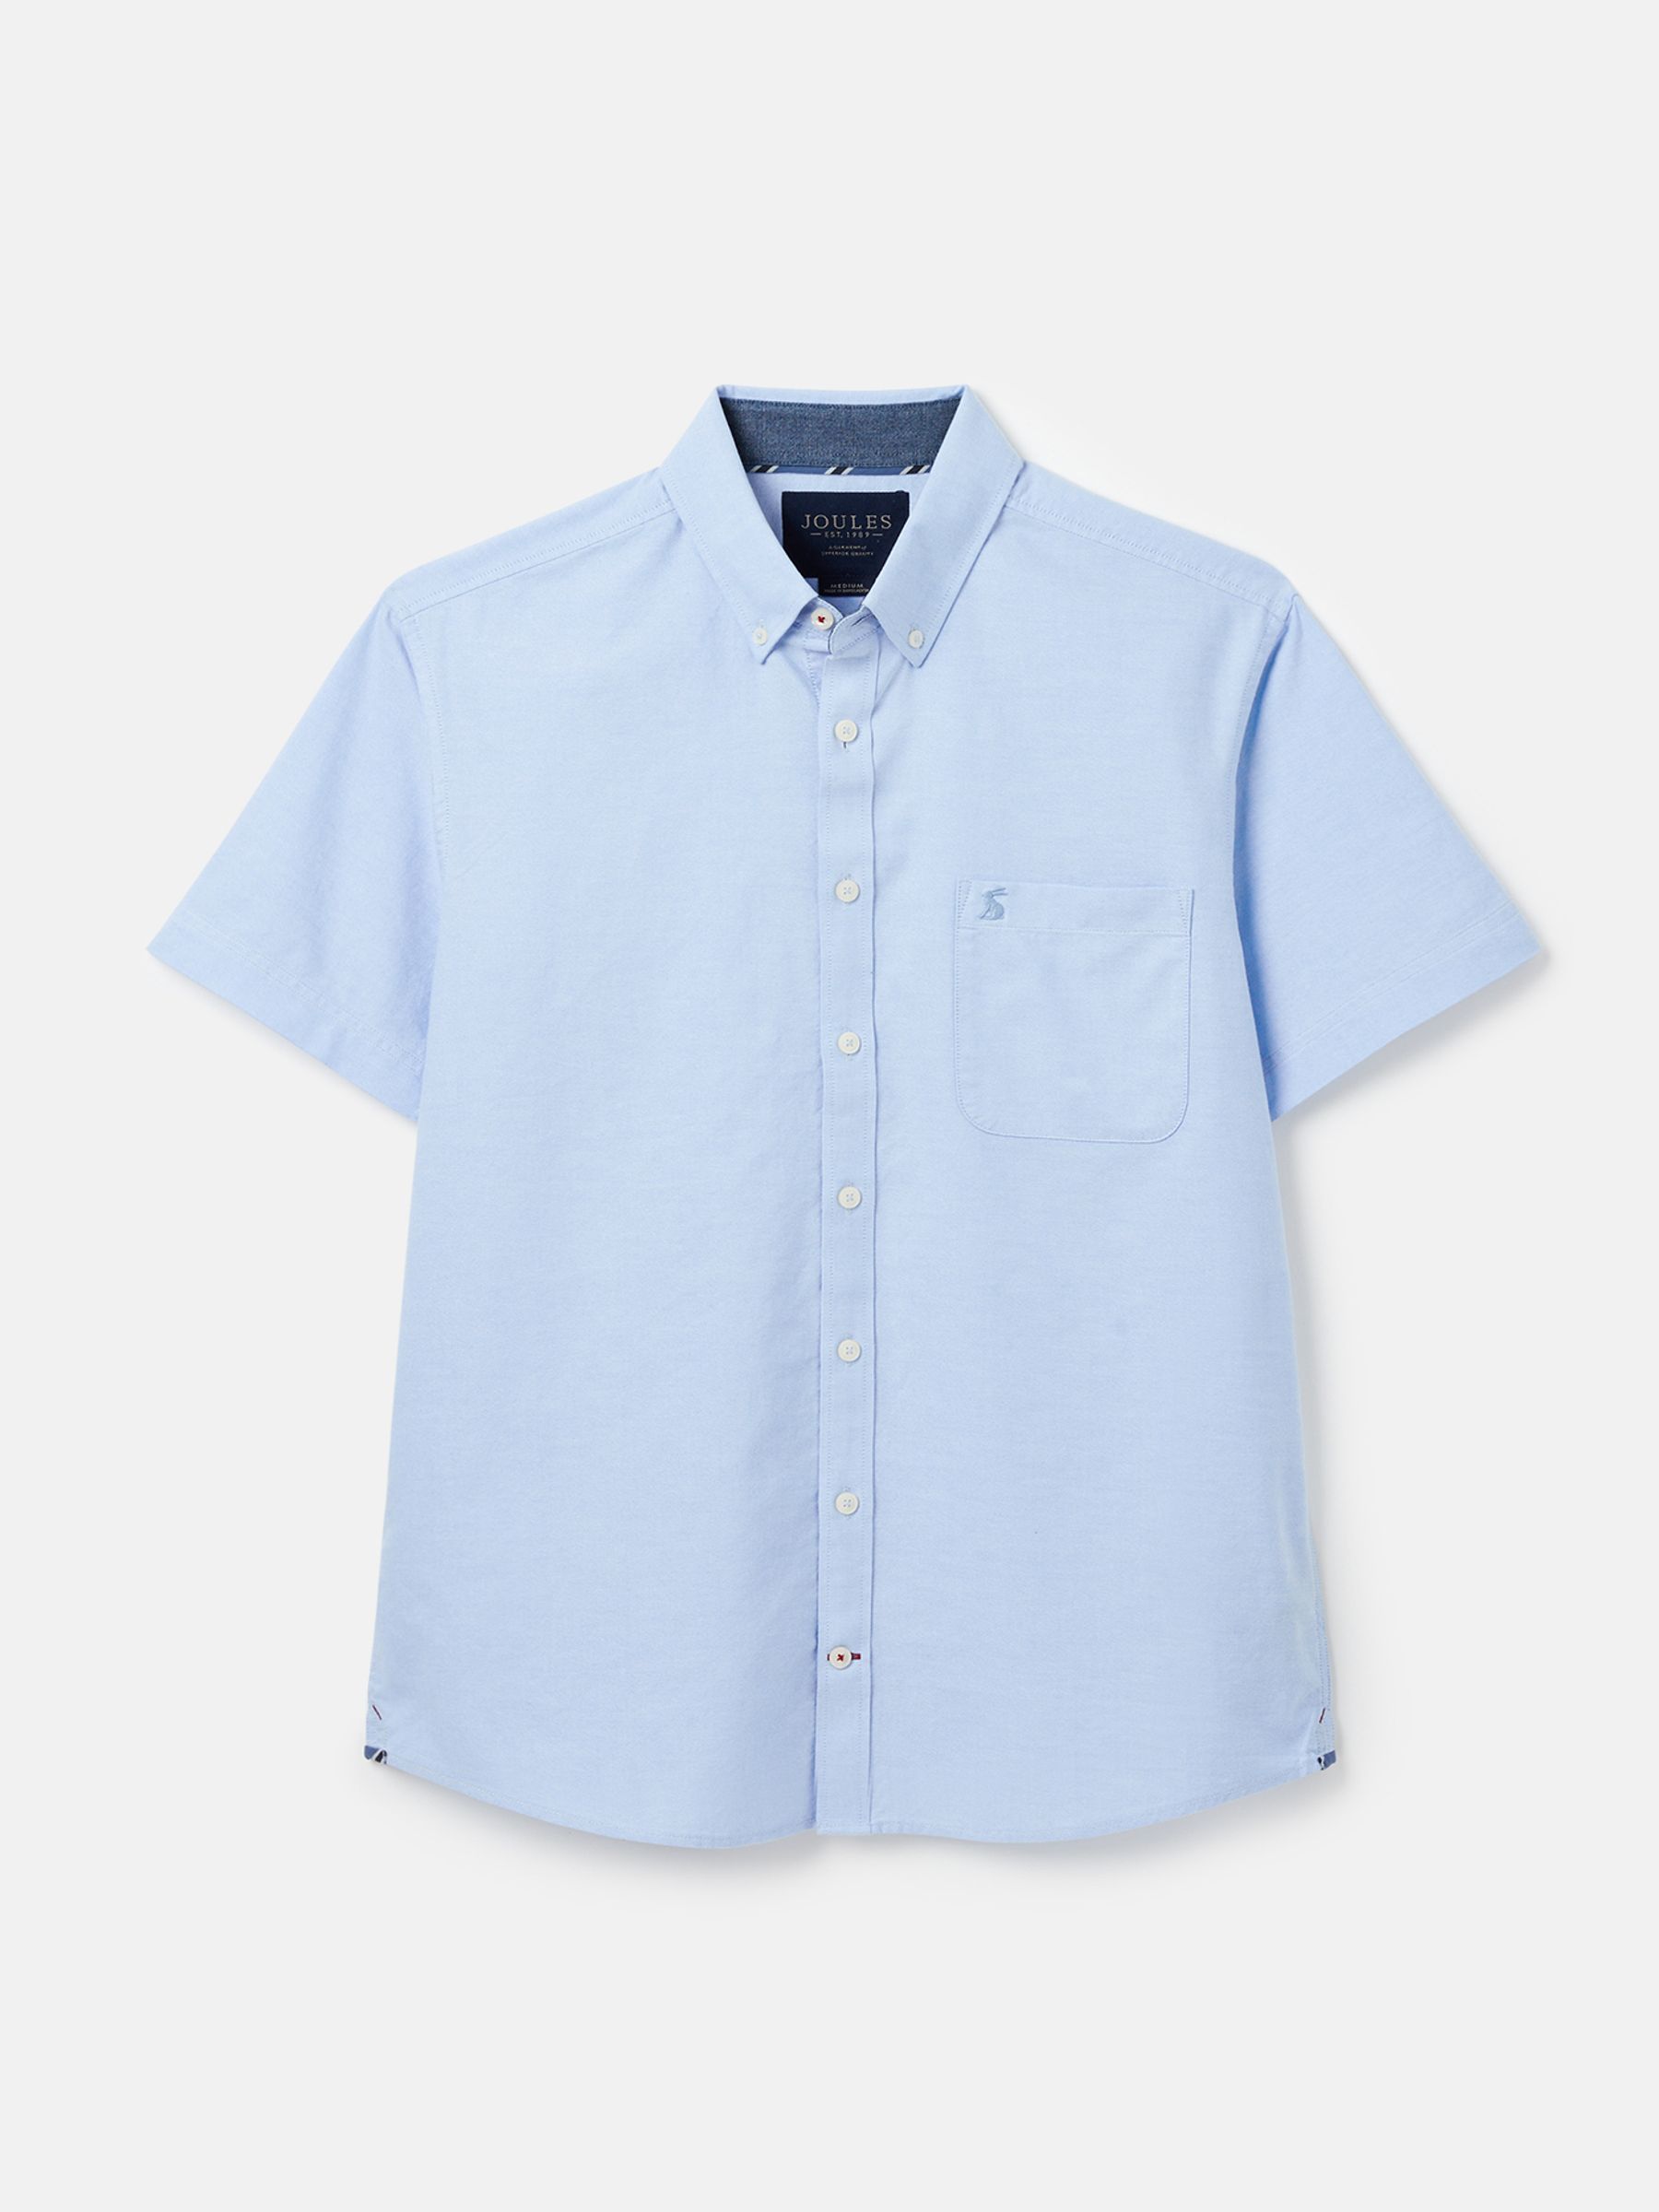 Buy Blue Short Sleeve Classic Shirt from the Joules online shop